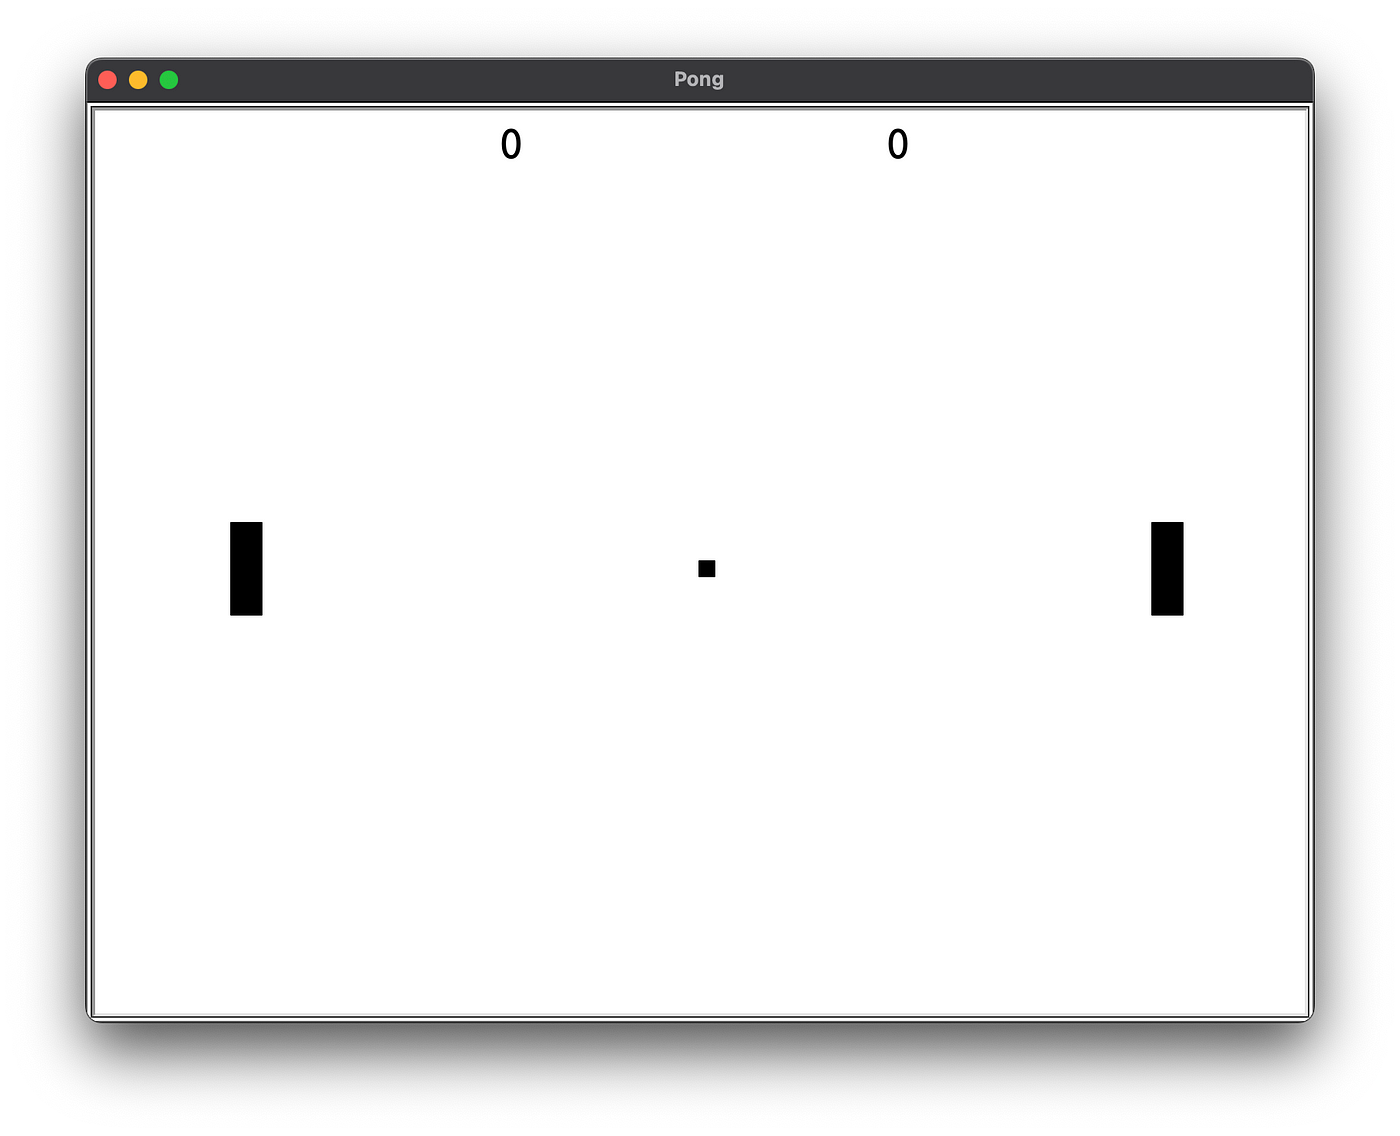 pygame - How to make multiple choice games on python - Stack Overflow